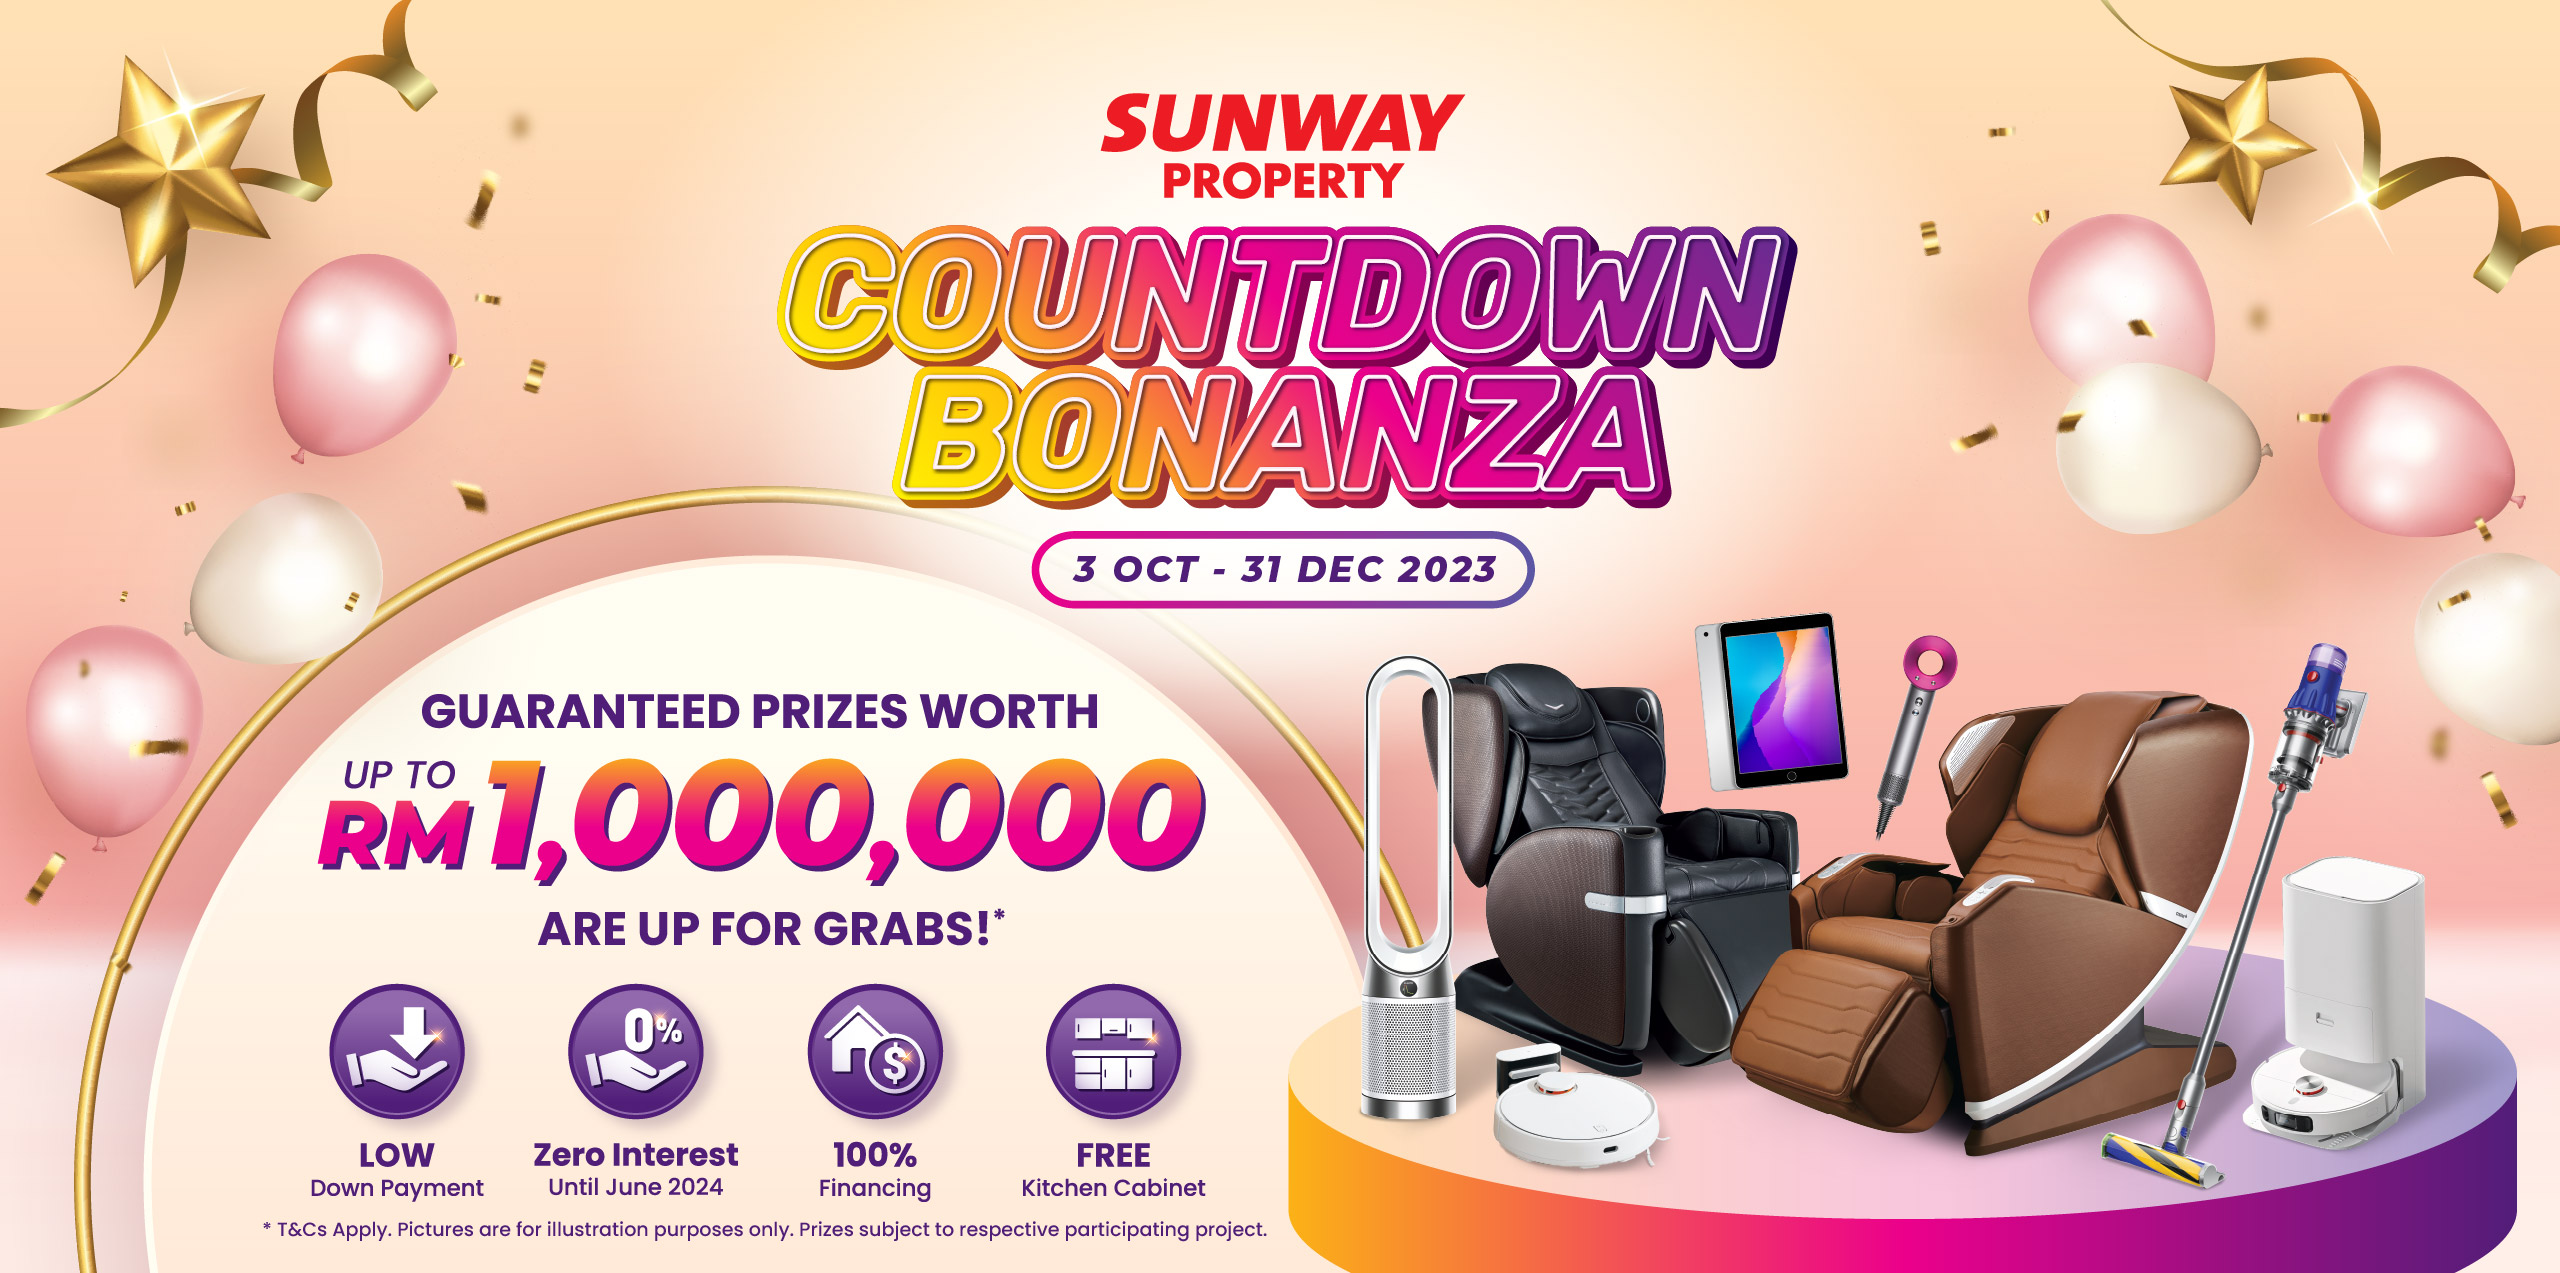 Get ready to unlock your dream home with Sunway Property's Countdown Bonanza! Enjoy Exclusive deals and grab OSIM Massage Chair, Xiaomi Robot Vacuum, iPad 10th Gen and many more